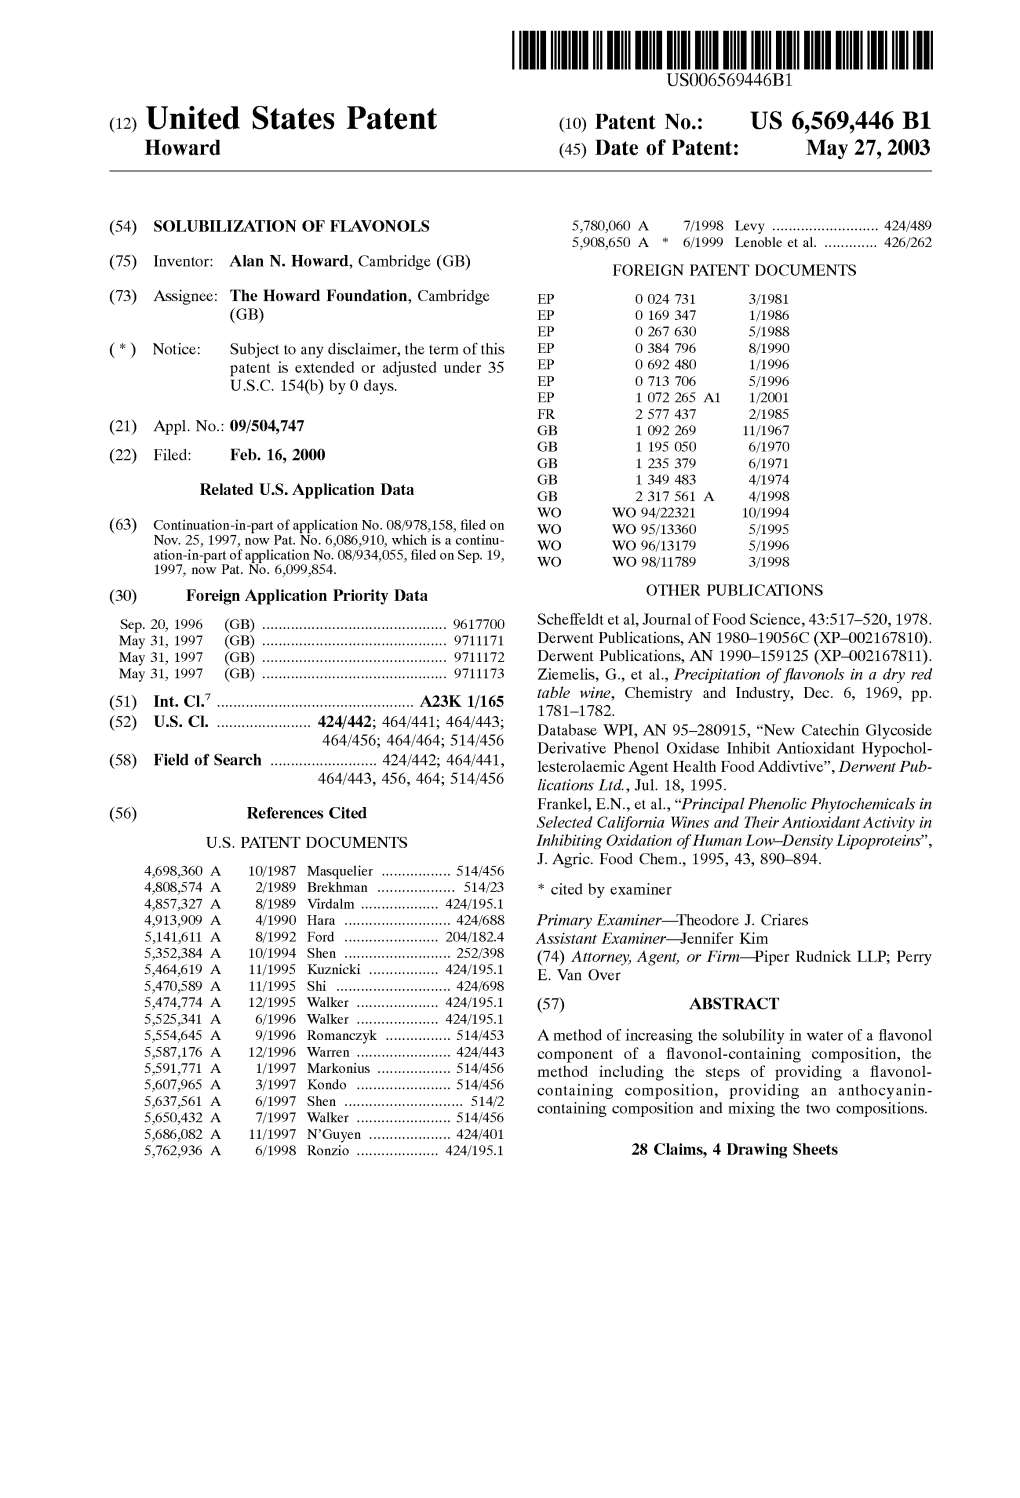 (12) United States Patent (10) Patent No.: US 6,569,446 B1 Howard (45) Date of Patent: May 27, 2003